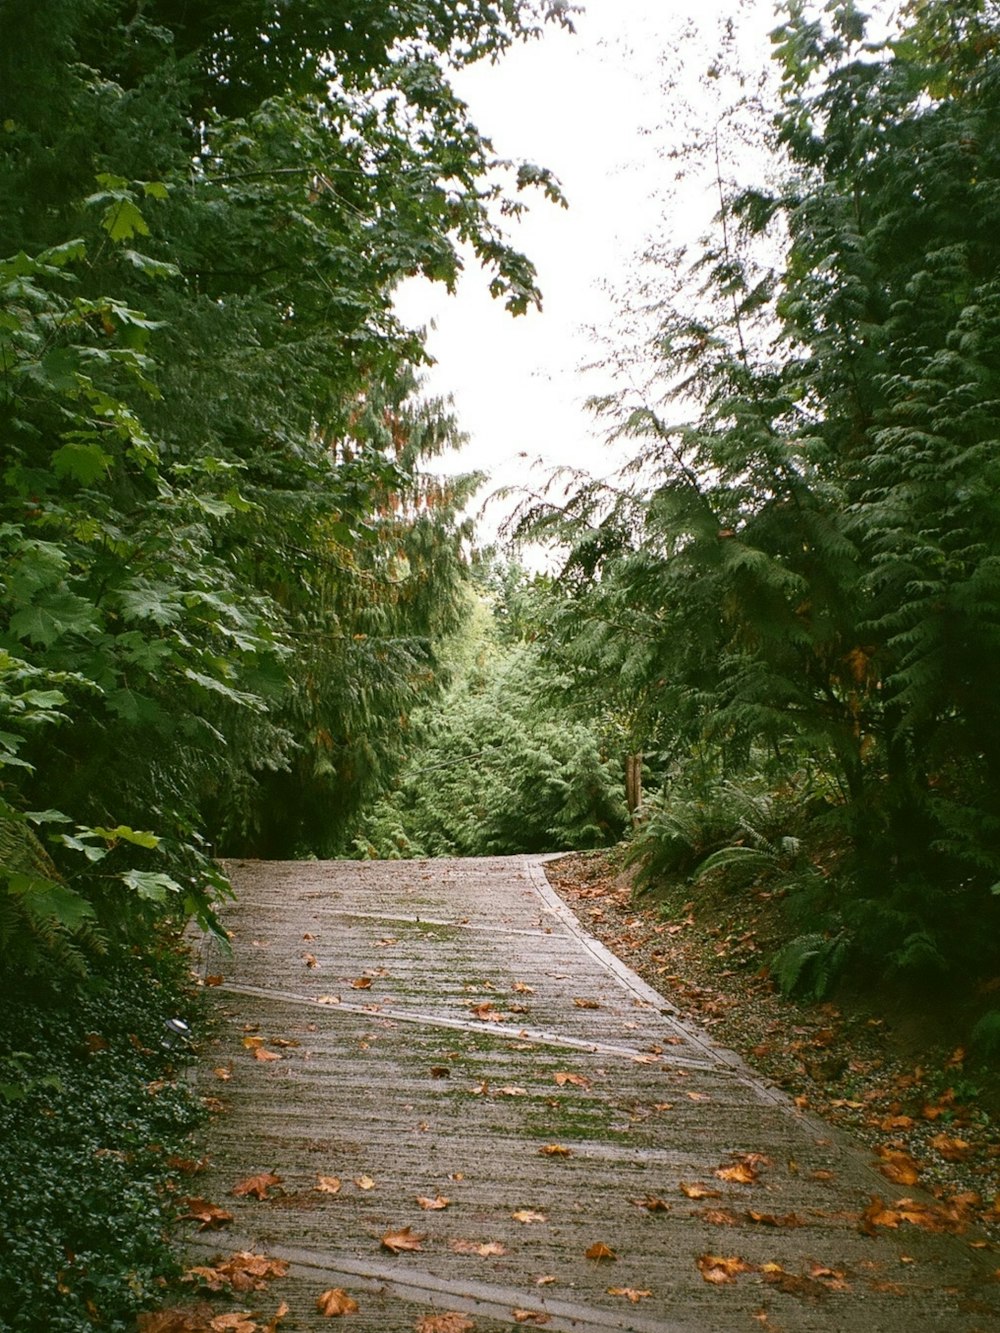 a path through a forest with lots of leaves on the ground